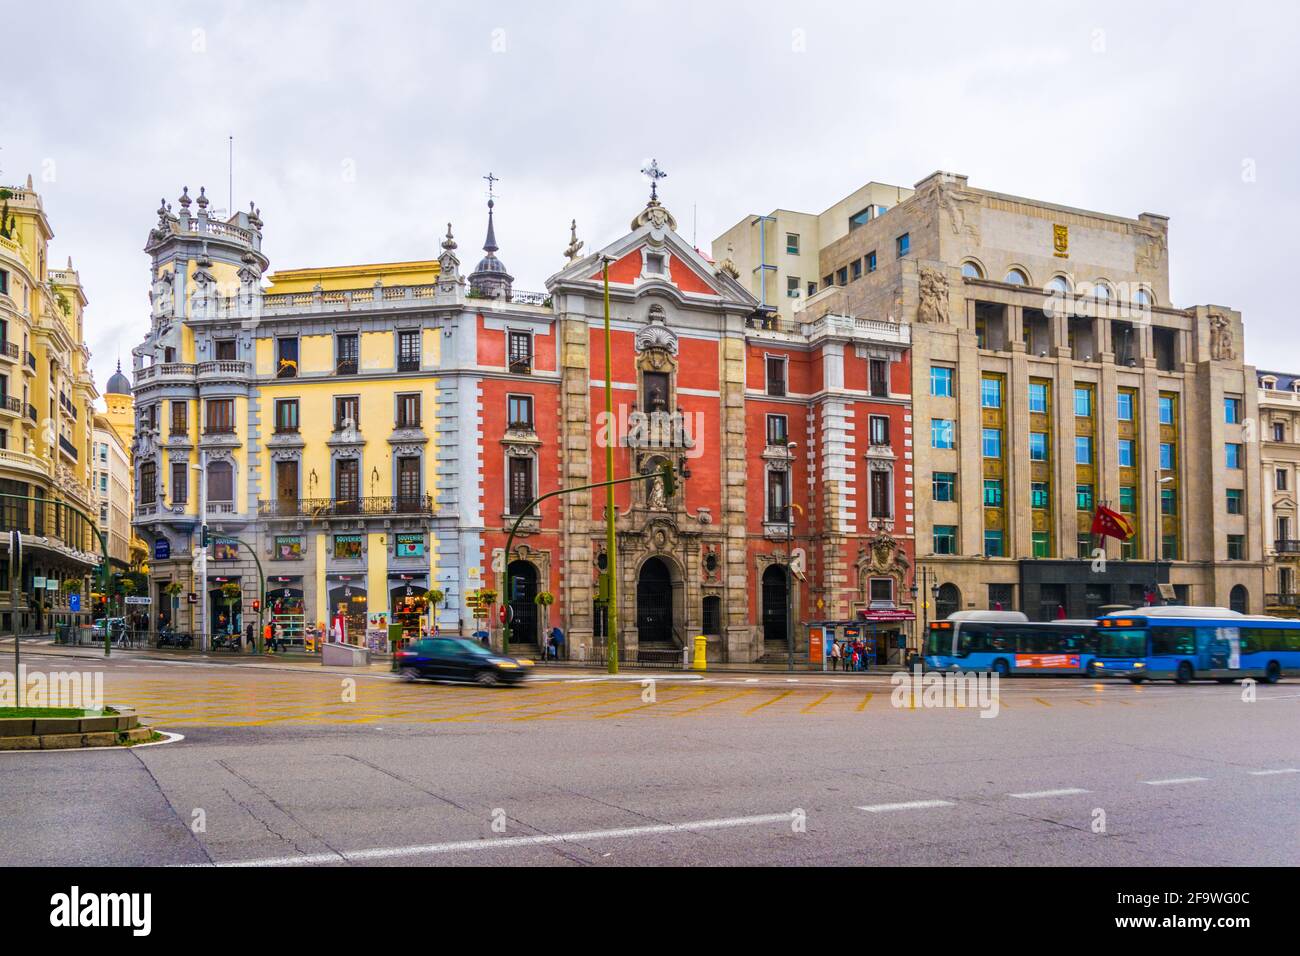 MADRID, SPAIN, JANUARY 9, 2016: view of the calle de alcala boulevard in madrid which is the second most famous street of the city Stock Photo